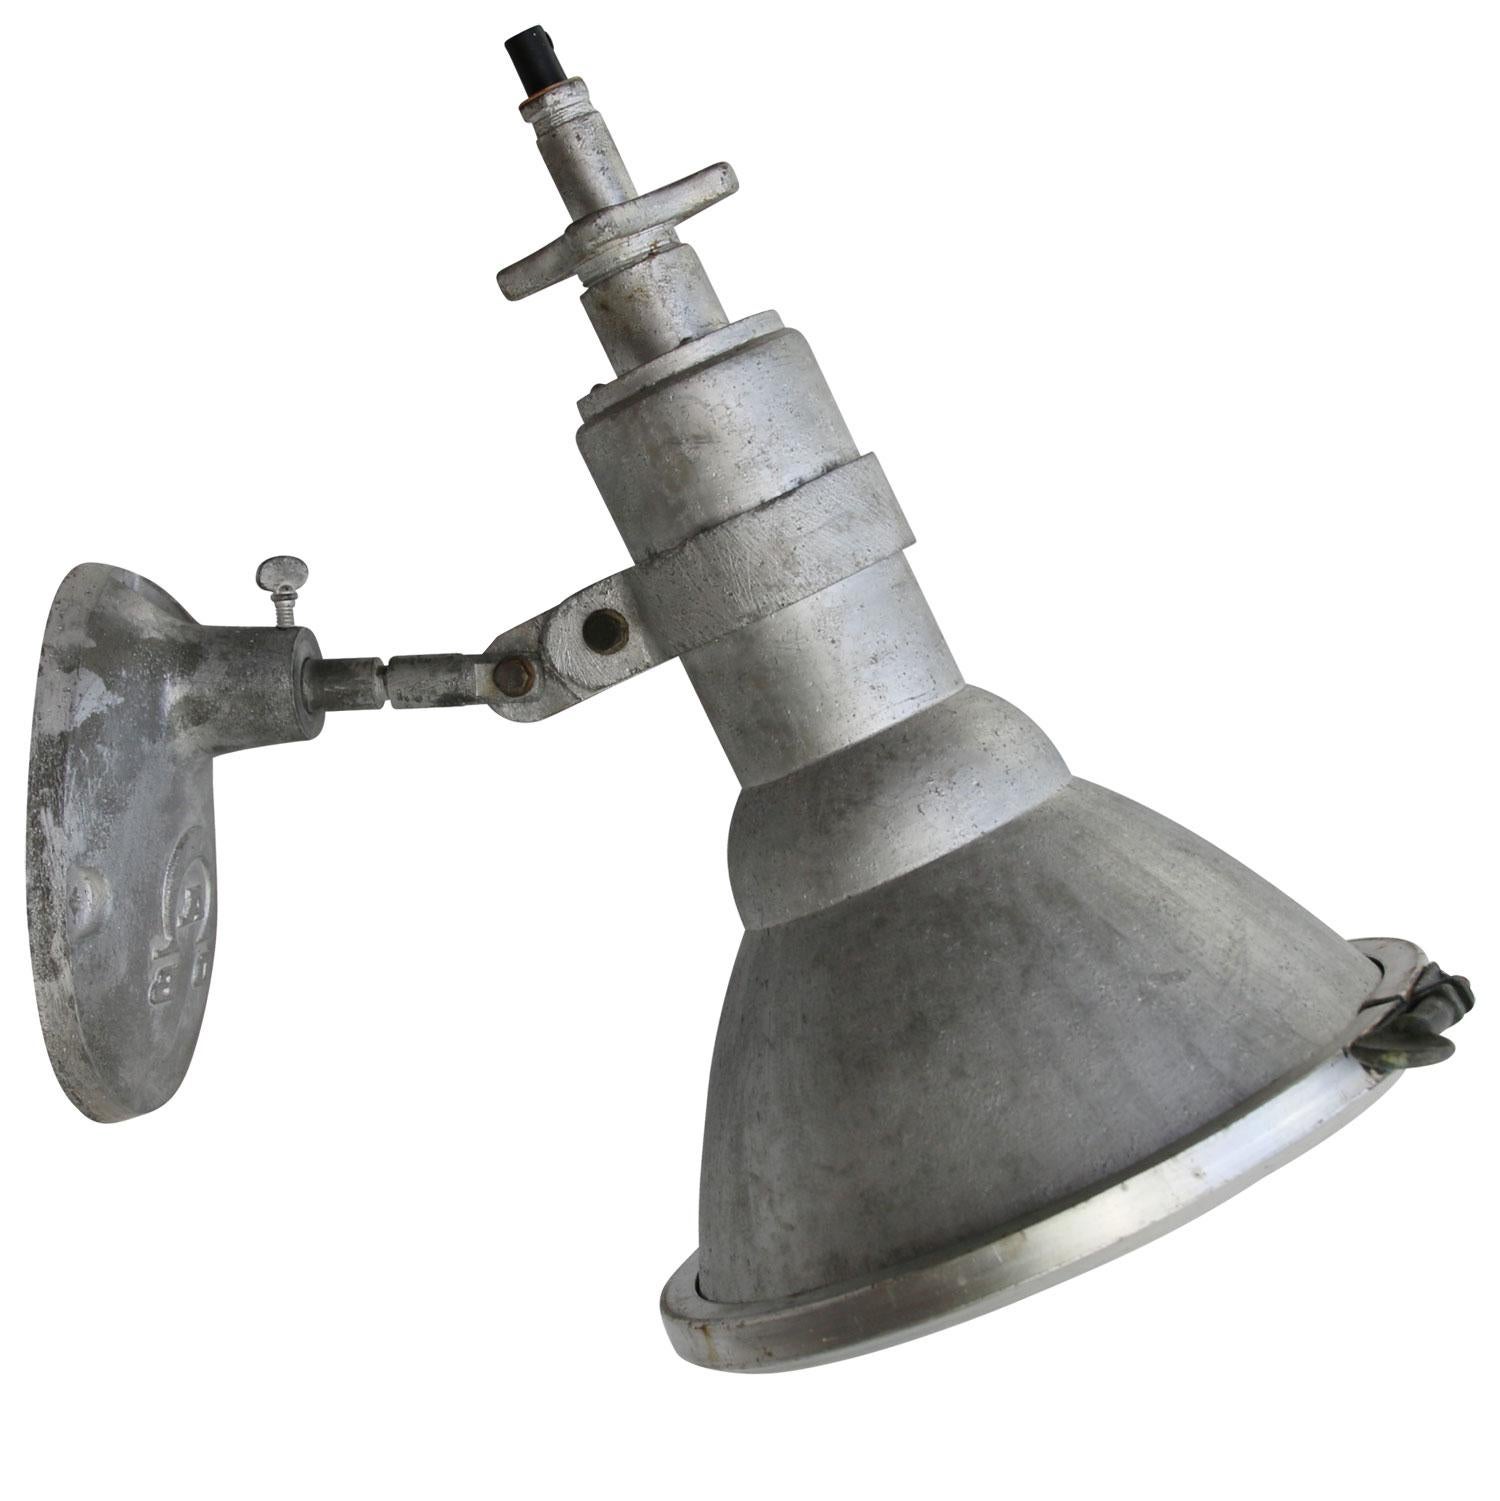 Industrial wall, floor spot light
aluminum shade and cast aluminum stand
adjustable in angle, clear glass.

Weight: 2.40 kg / 5.3 lb

Priced per individual item. All lamps have been made suitable by international standards for incandescent